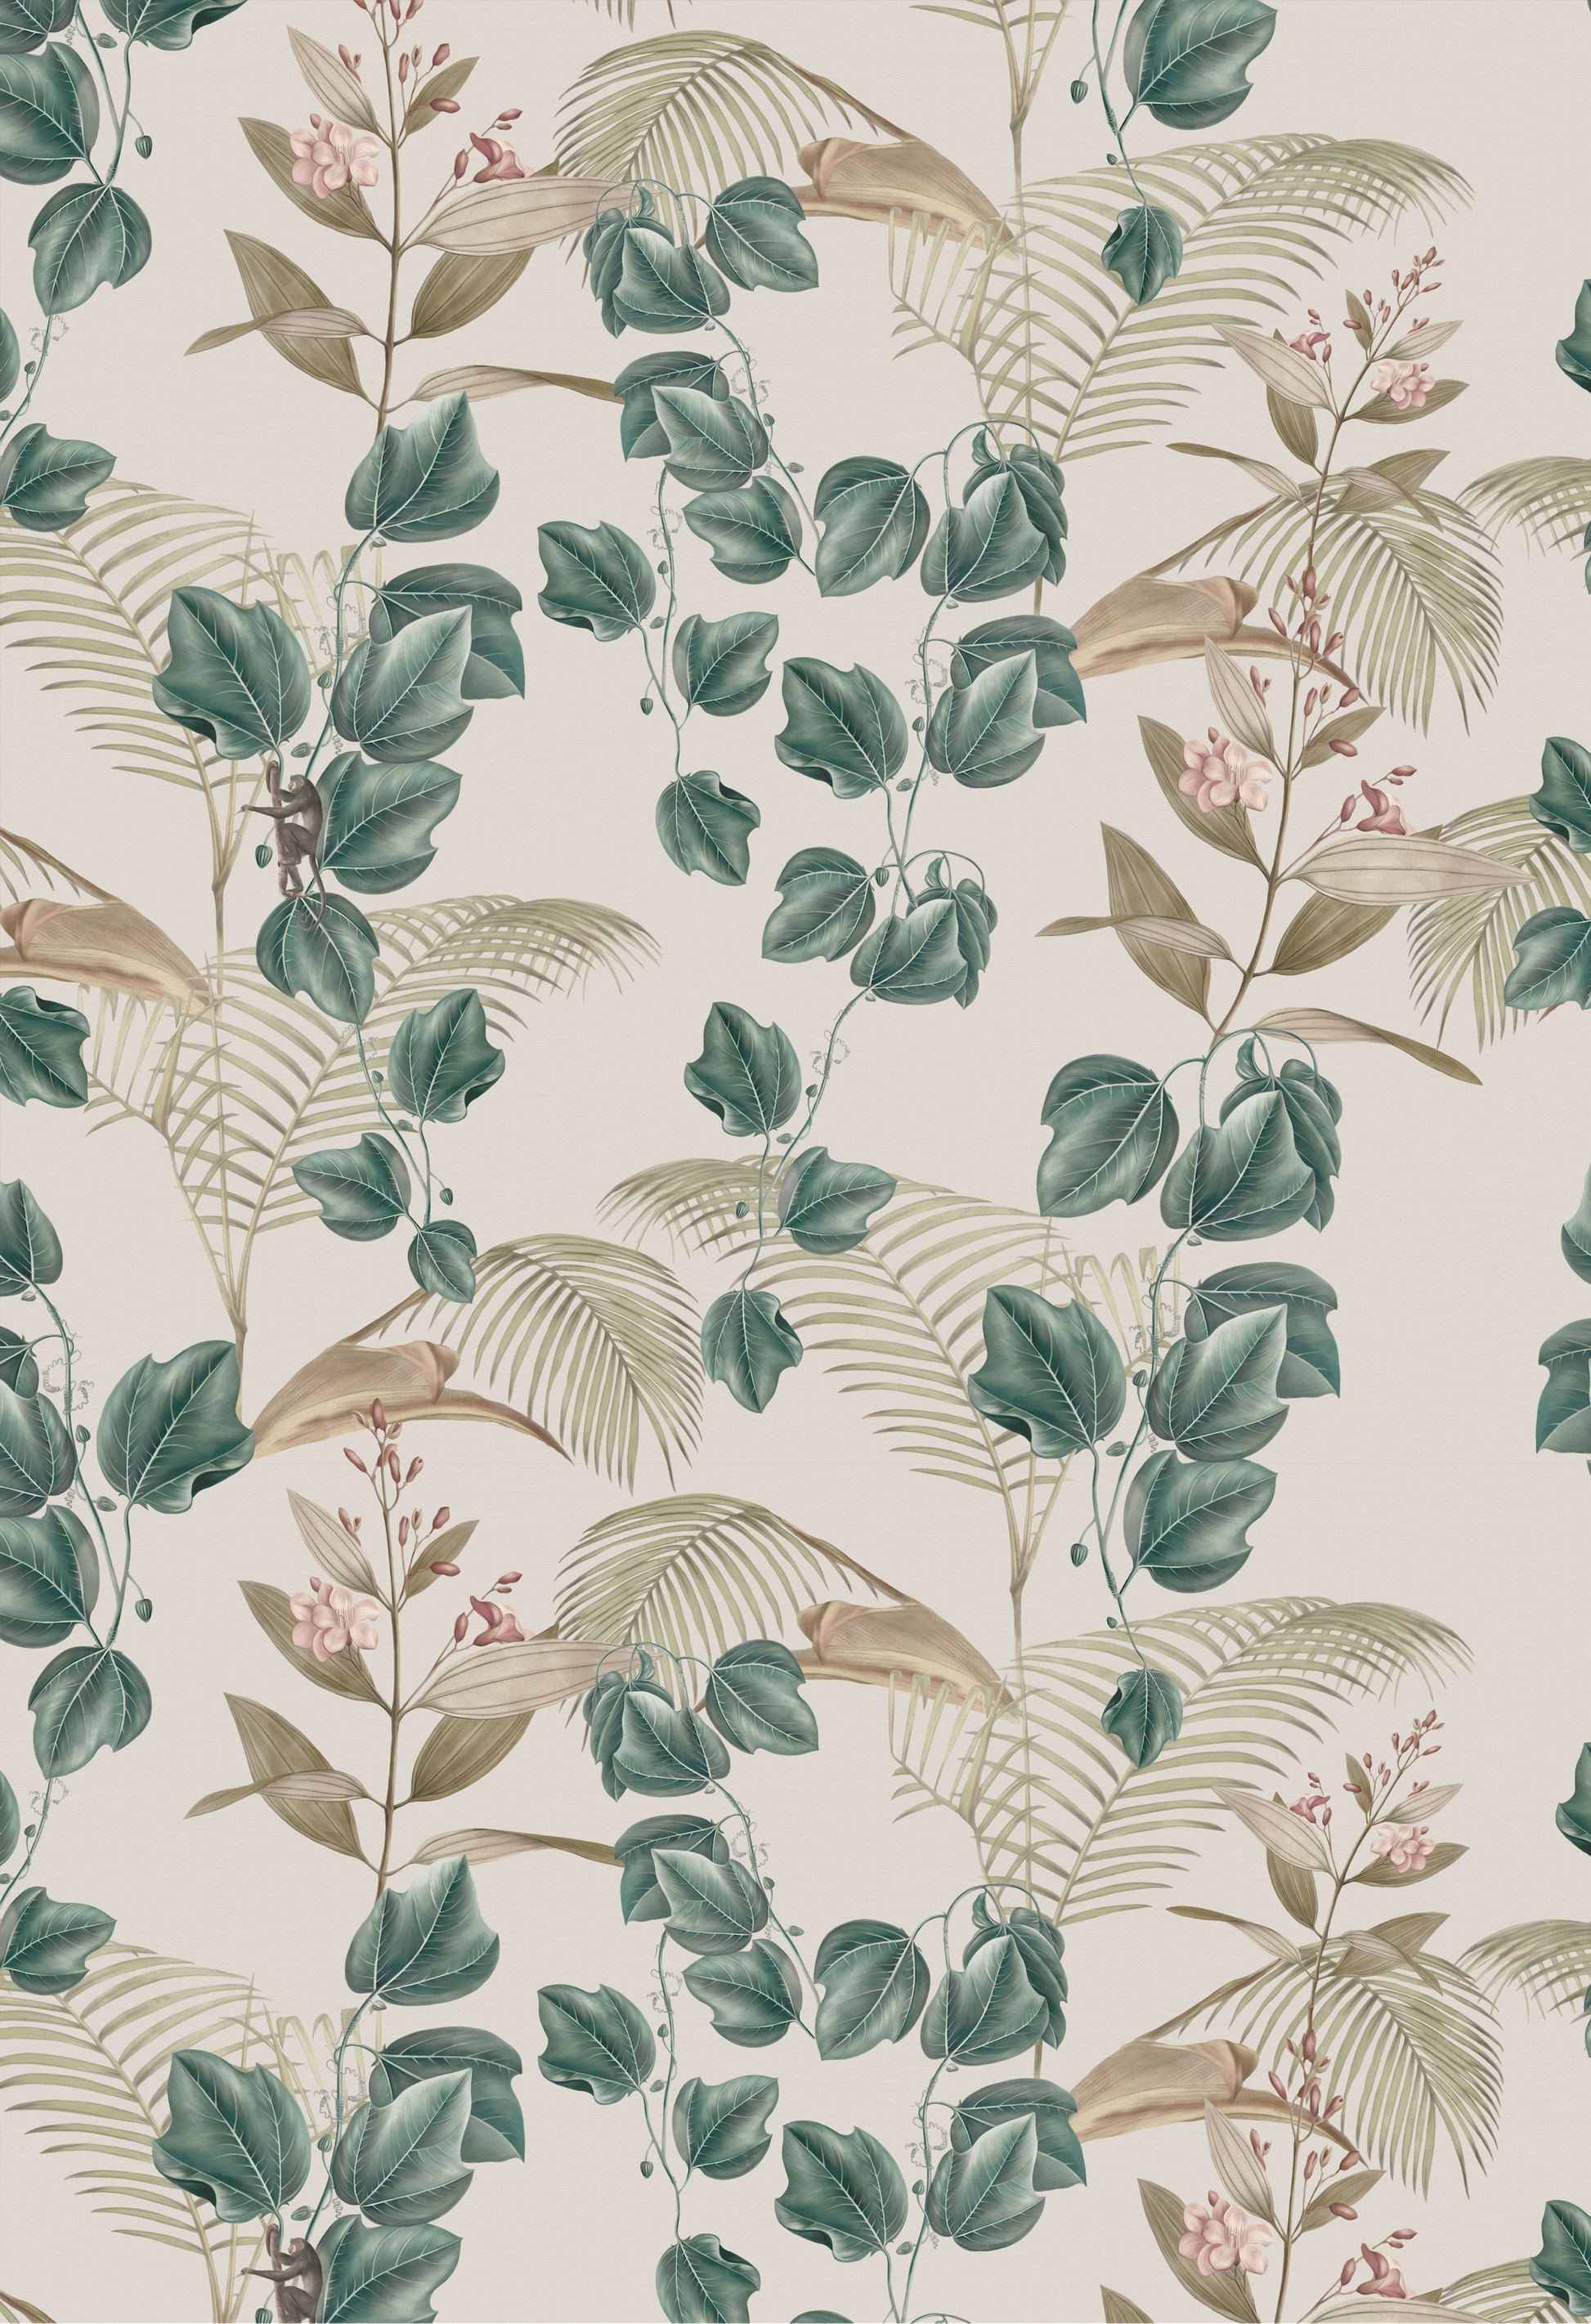 ivy wallpaper of flora and fauna with golden palms and little money on white ground by Deus ex Gardenia of the Wild Ivy wallpaper in Dawn.